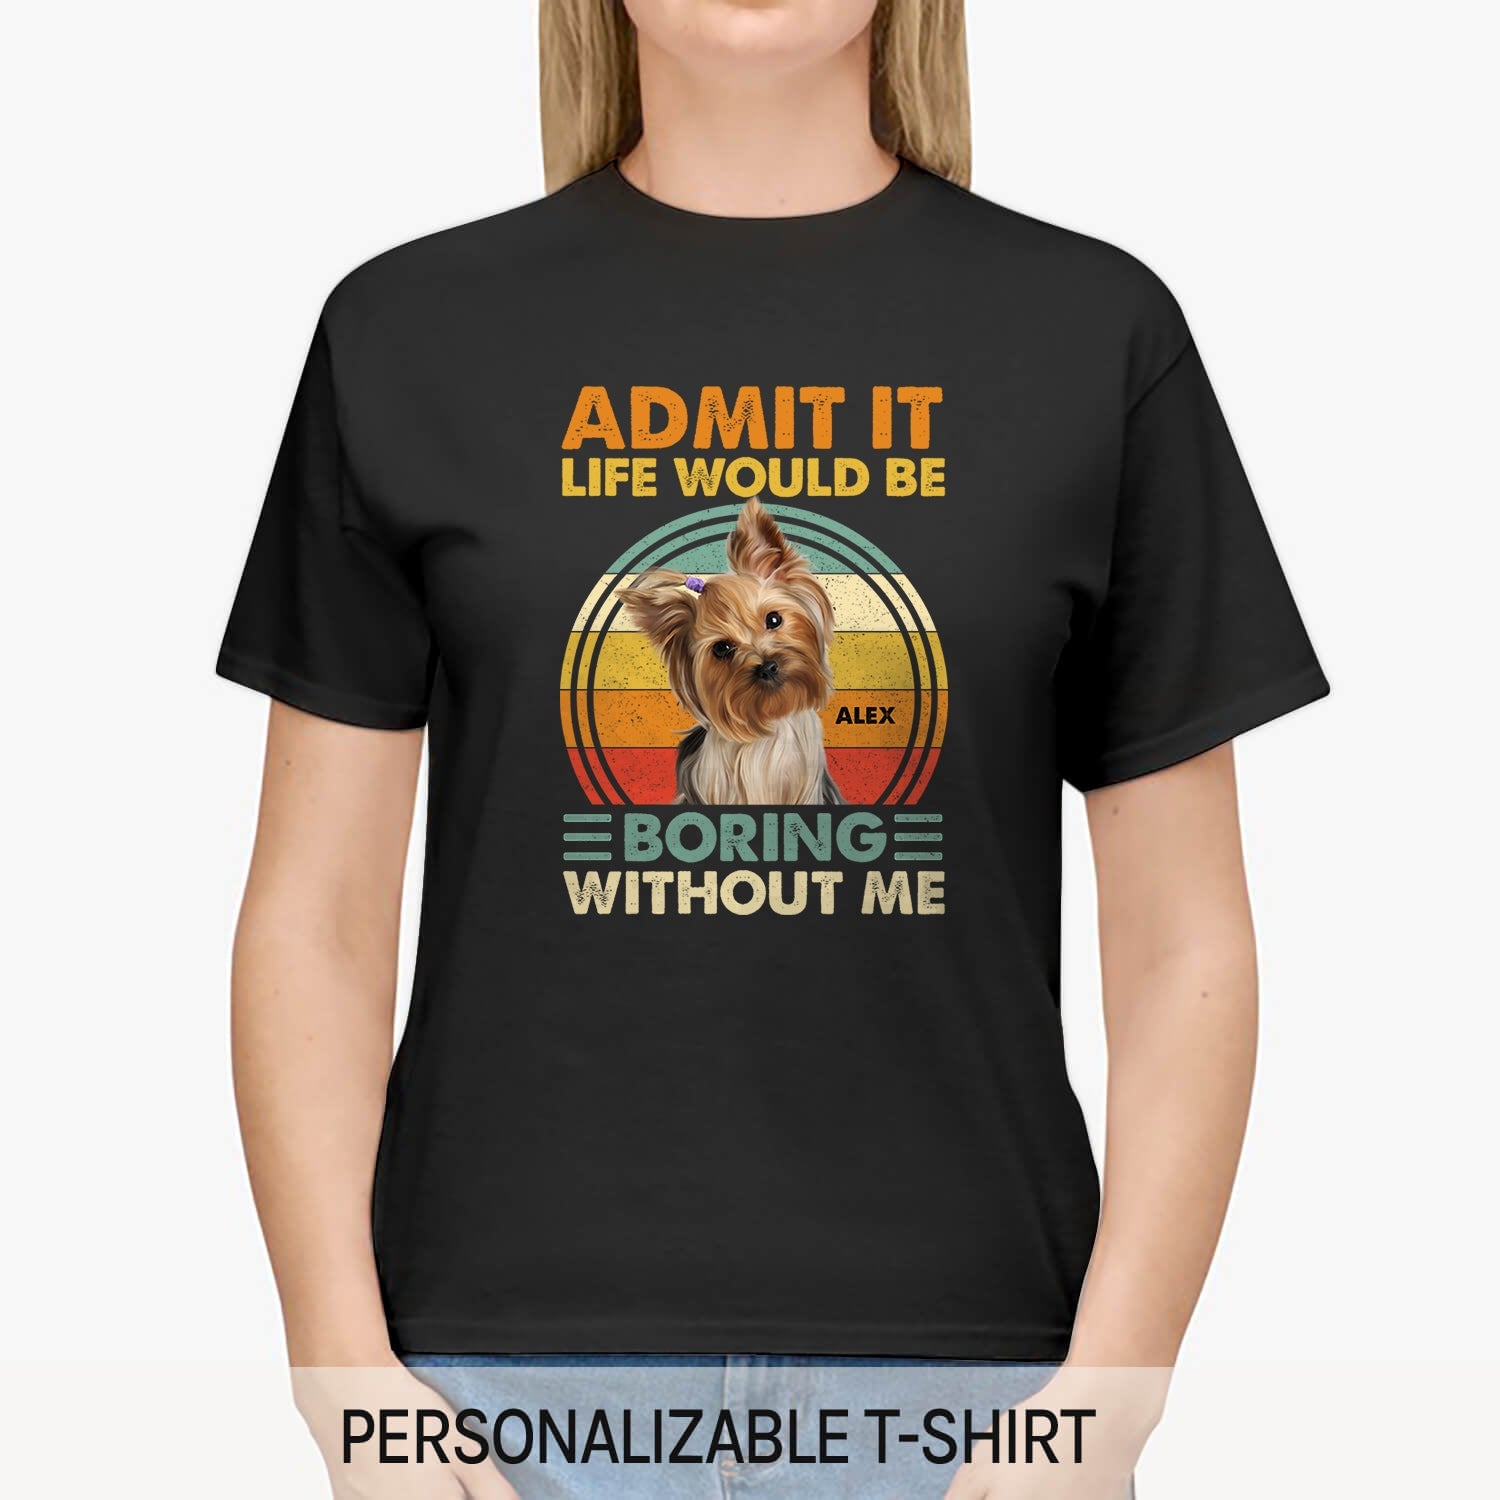 Life Would Be Boring Without Me - Personalized Birthday or Christmas gift for Dog Lovers - Custom Tshirt - MyMindfulGifts